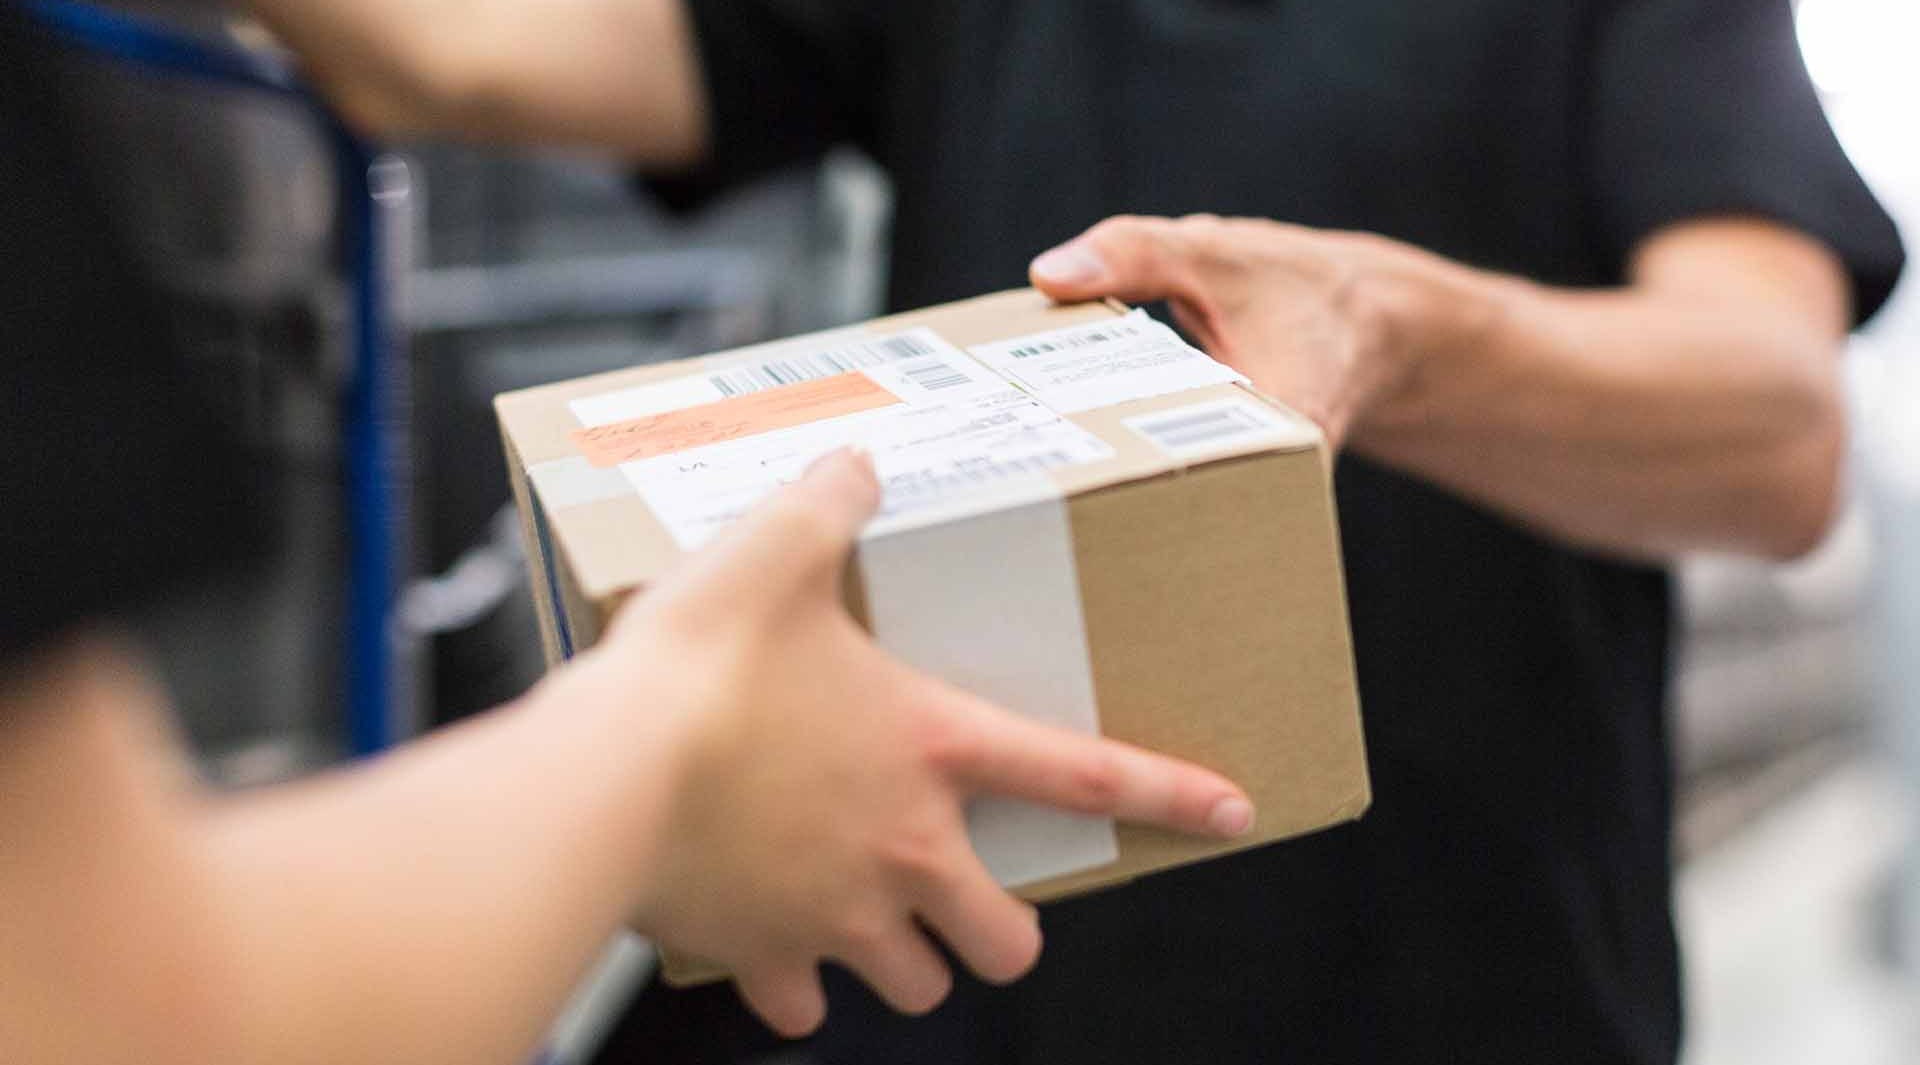 parcel box delivery passing between two people hands trade paperwork black shirts